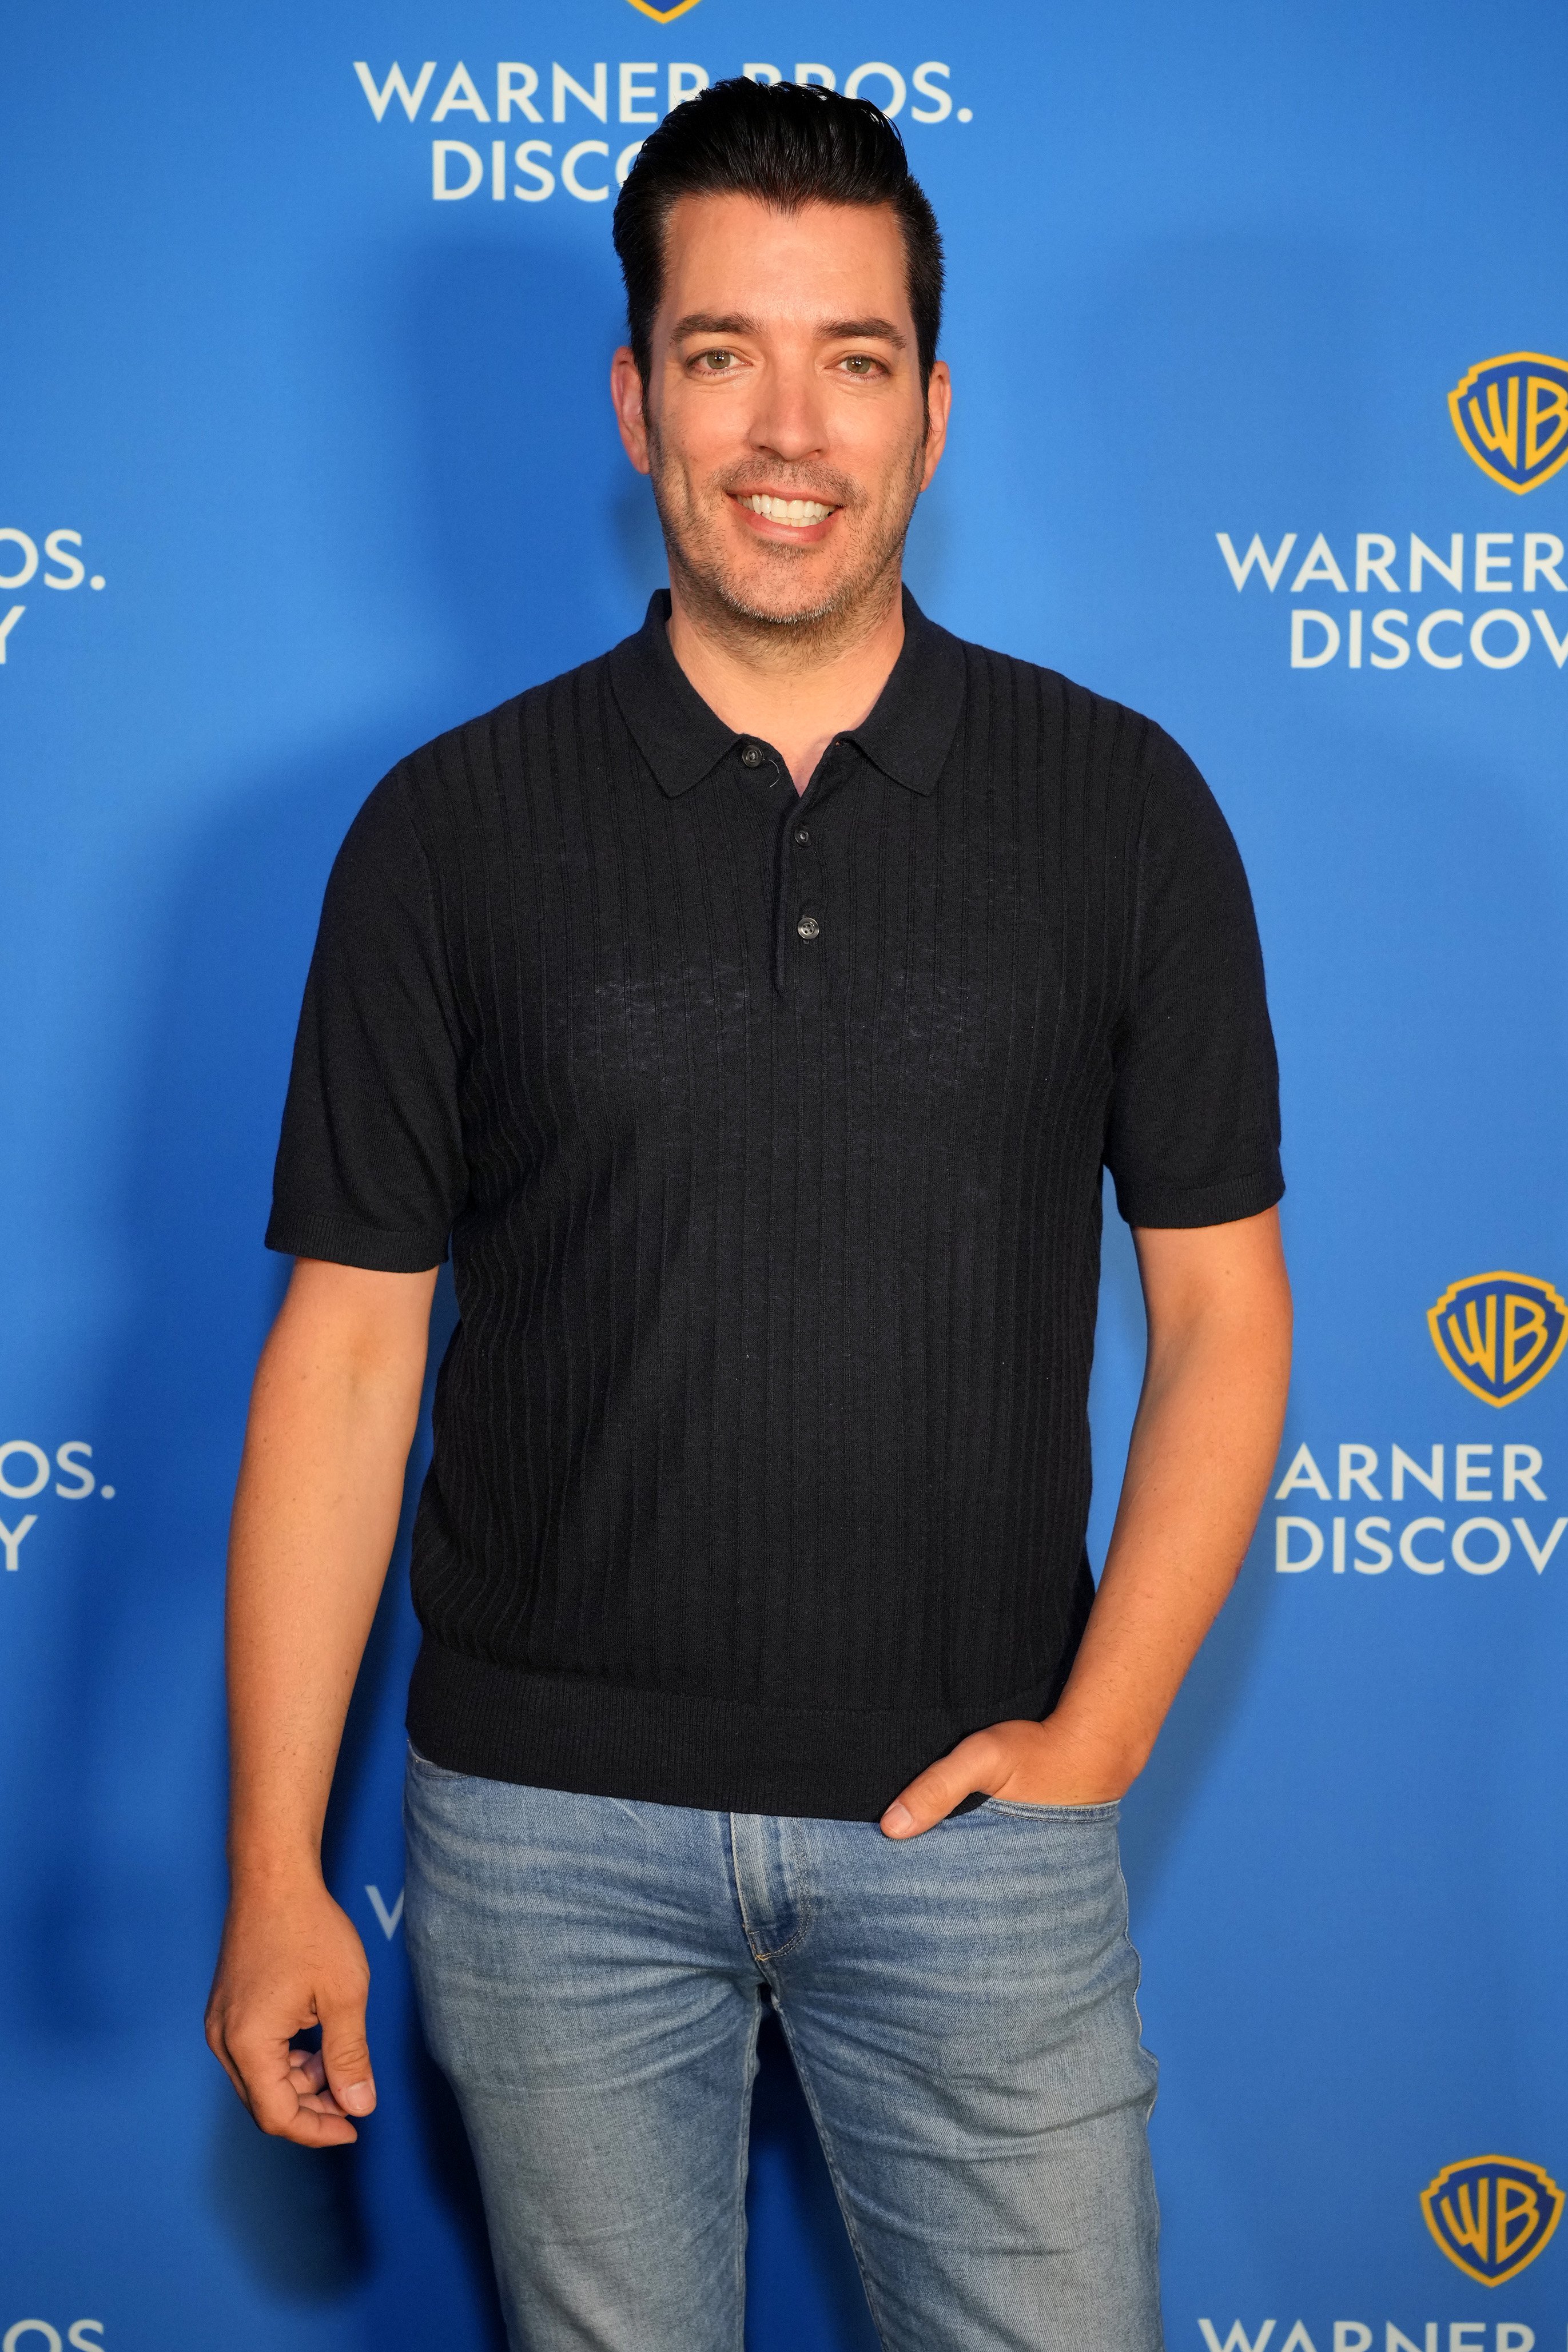 Jonathan Scott at the Warner Bros. Discovery Upfront 2022 arrivals on the red carpet at The Theater at Madison Square Garden on May 18, 2022 in New York City | Source: Getty Images